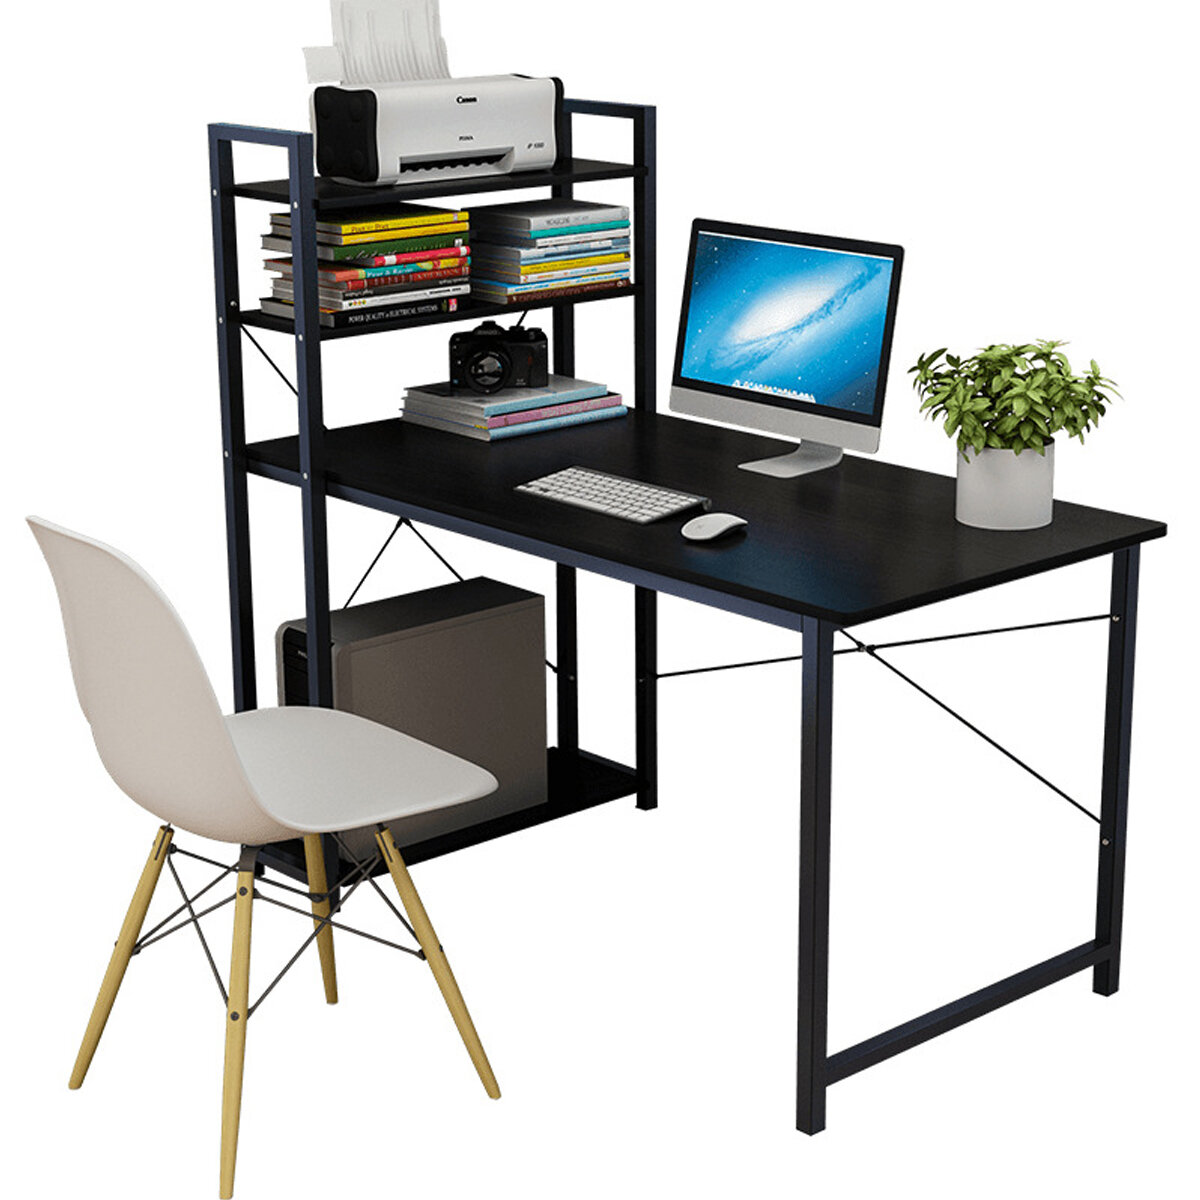 

Computer Desk Simple Bookshelf Combination Desktop Table Student Home Bedroom Simple Learning Table for Home Office